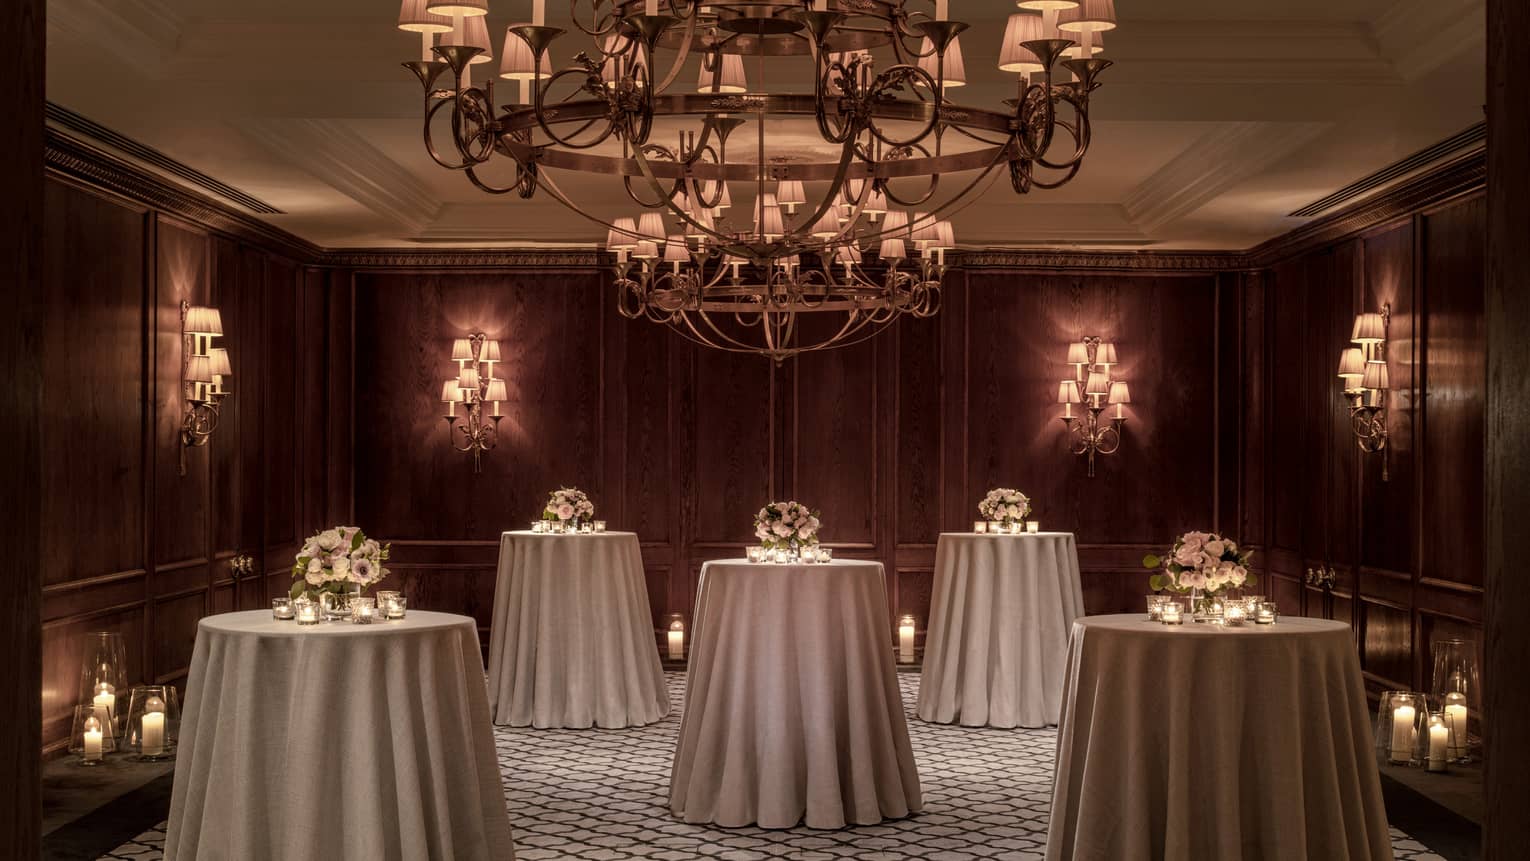 A room with standing round tables and a chandelier.